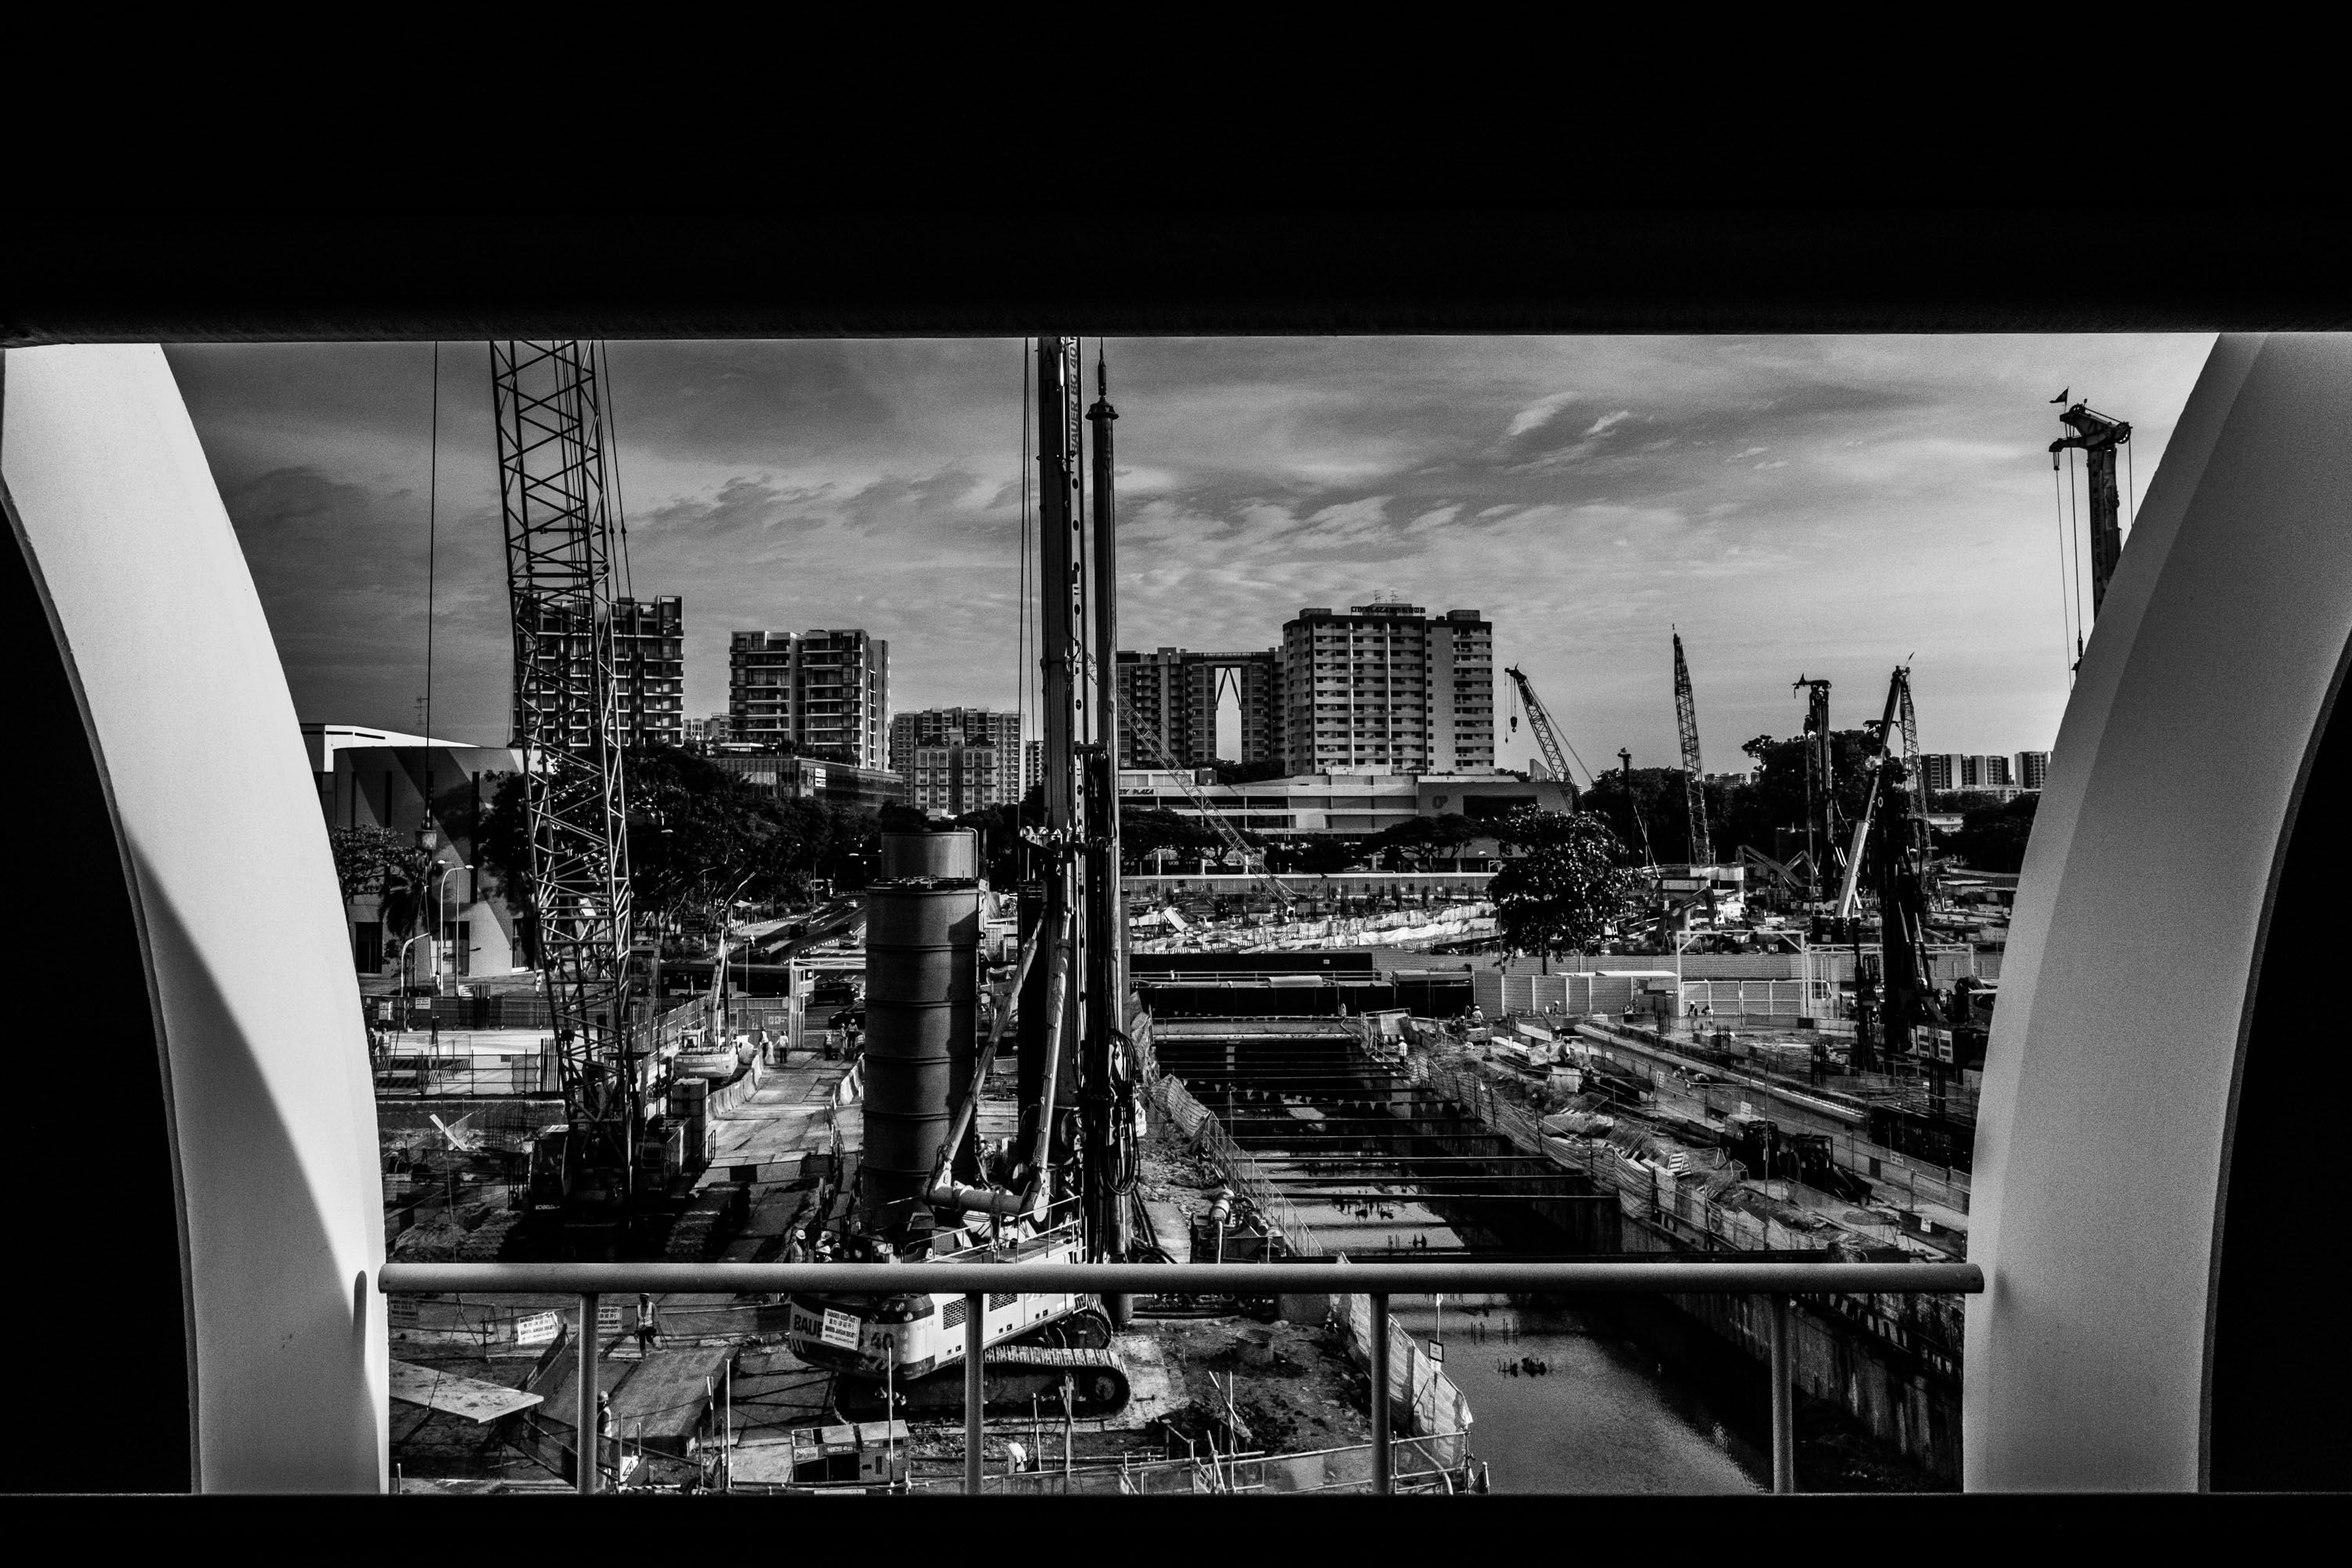 A construction site in Singapore. Image by Xyza Bacani. Singapore, 2016.